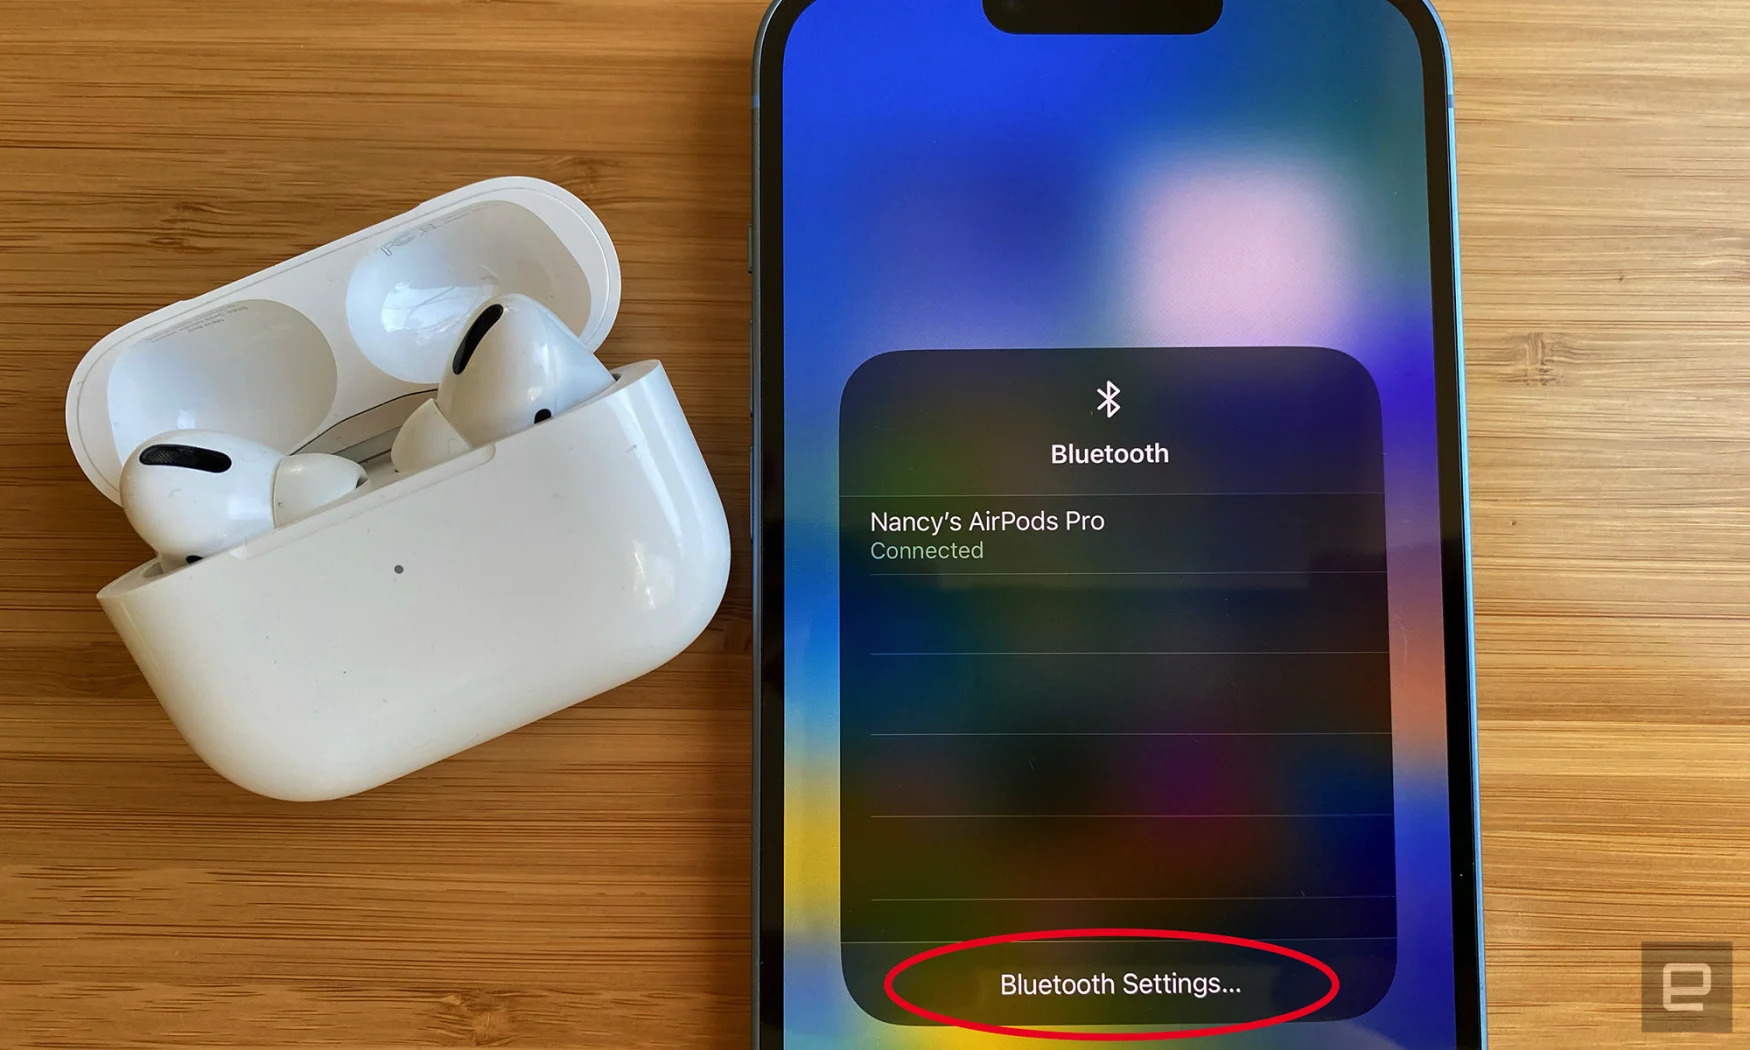 Gavmild Vil have Udvidelse How to connect AirPods to your iPhone, Mac, Apple Watch and more | Engadget